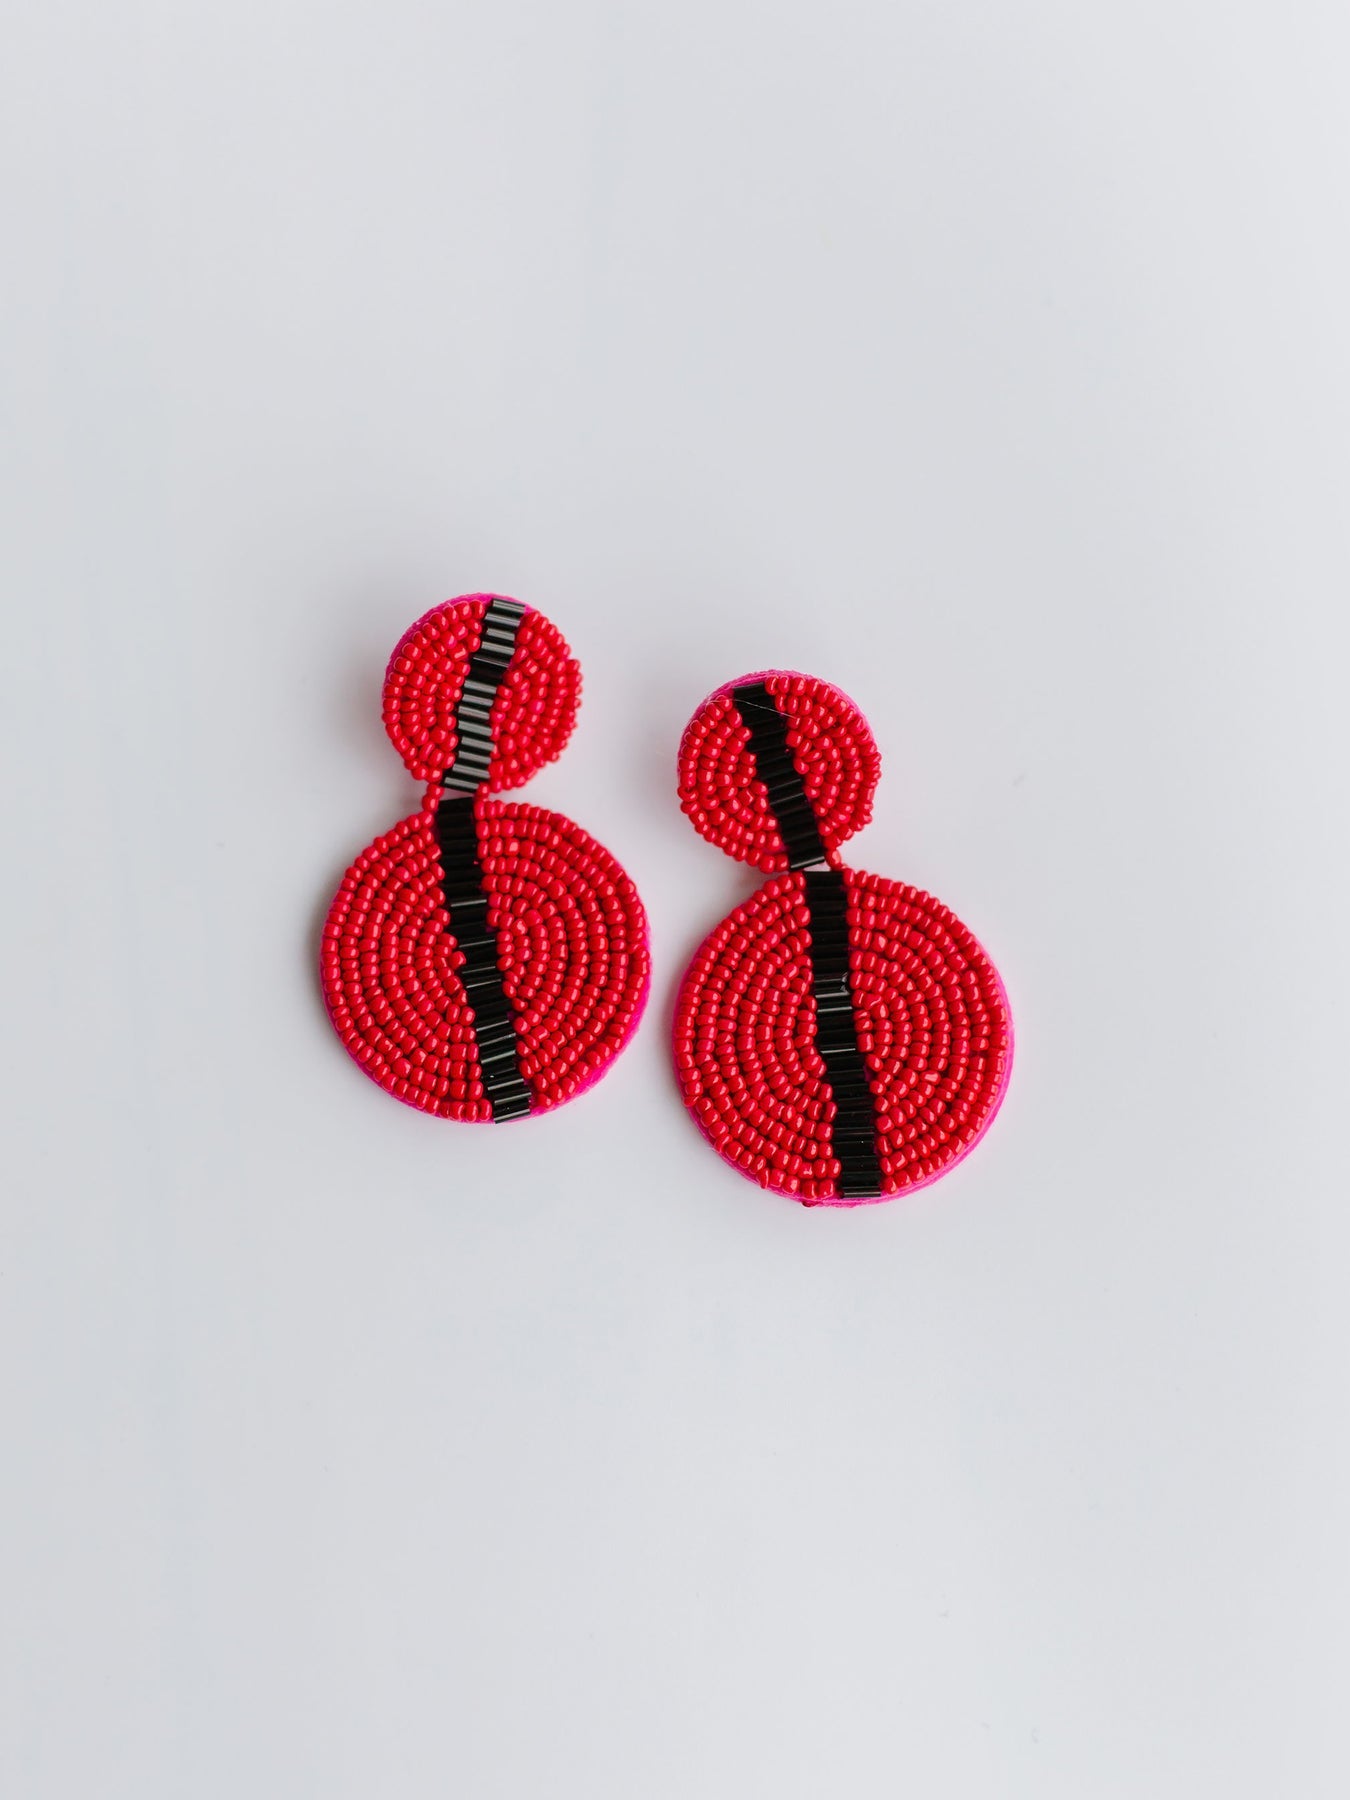 Michelle McDowell - The Colleen Earrings - Red + Black *Final Sale*